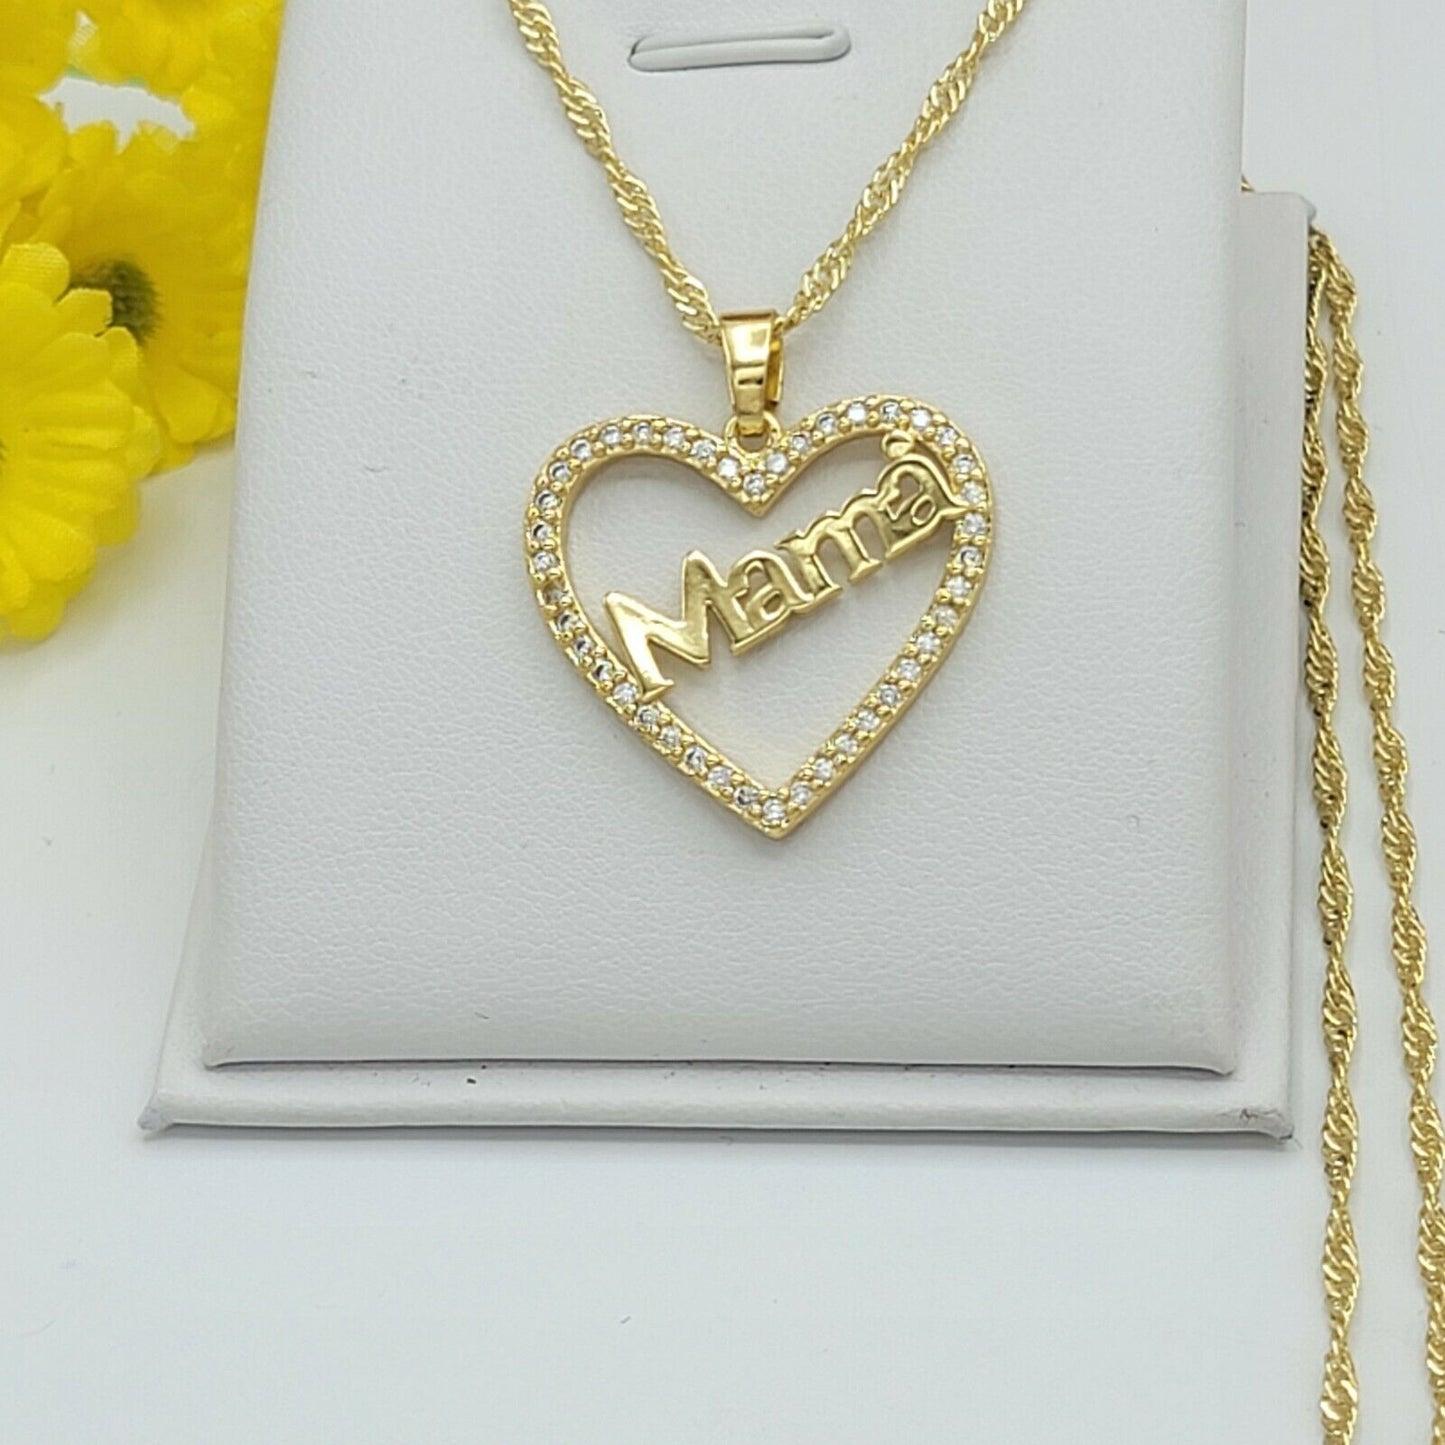 Necklaces - 14K Gold Plated. Mamá Heart Pendant & Chain.